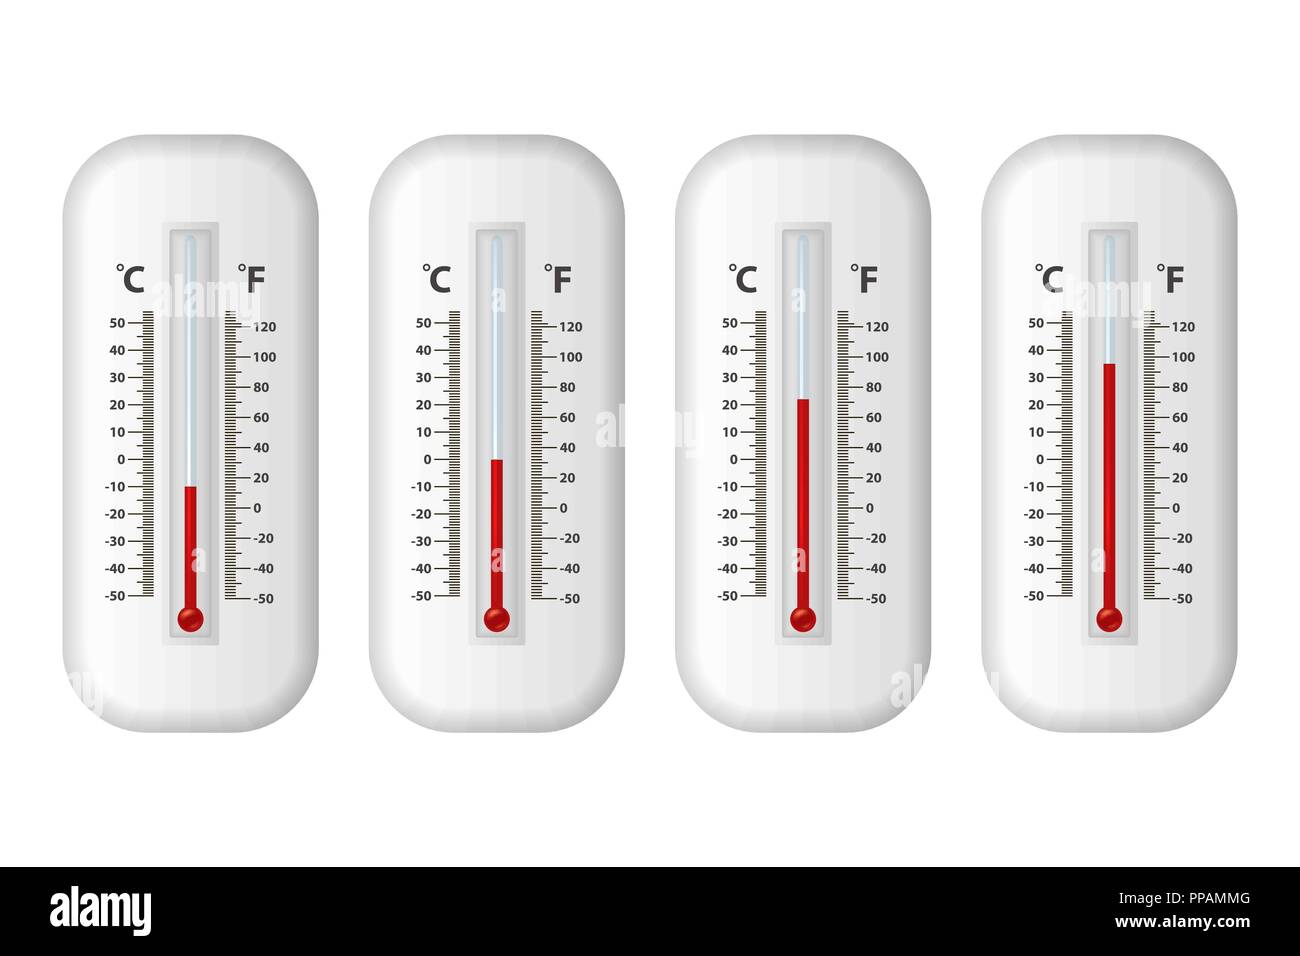 https://c8.alamy.com/comp/PPAMMG/vector-realistic-3d-celsius-and-fahrenheit-meteorology-weather-thermometer-icon-set-closeup-isolated-on-white-background-clip-art-design-template-for-graphics-thermometers-with-different-levels-PPAMMG.jpg